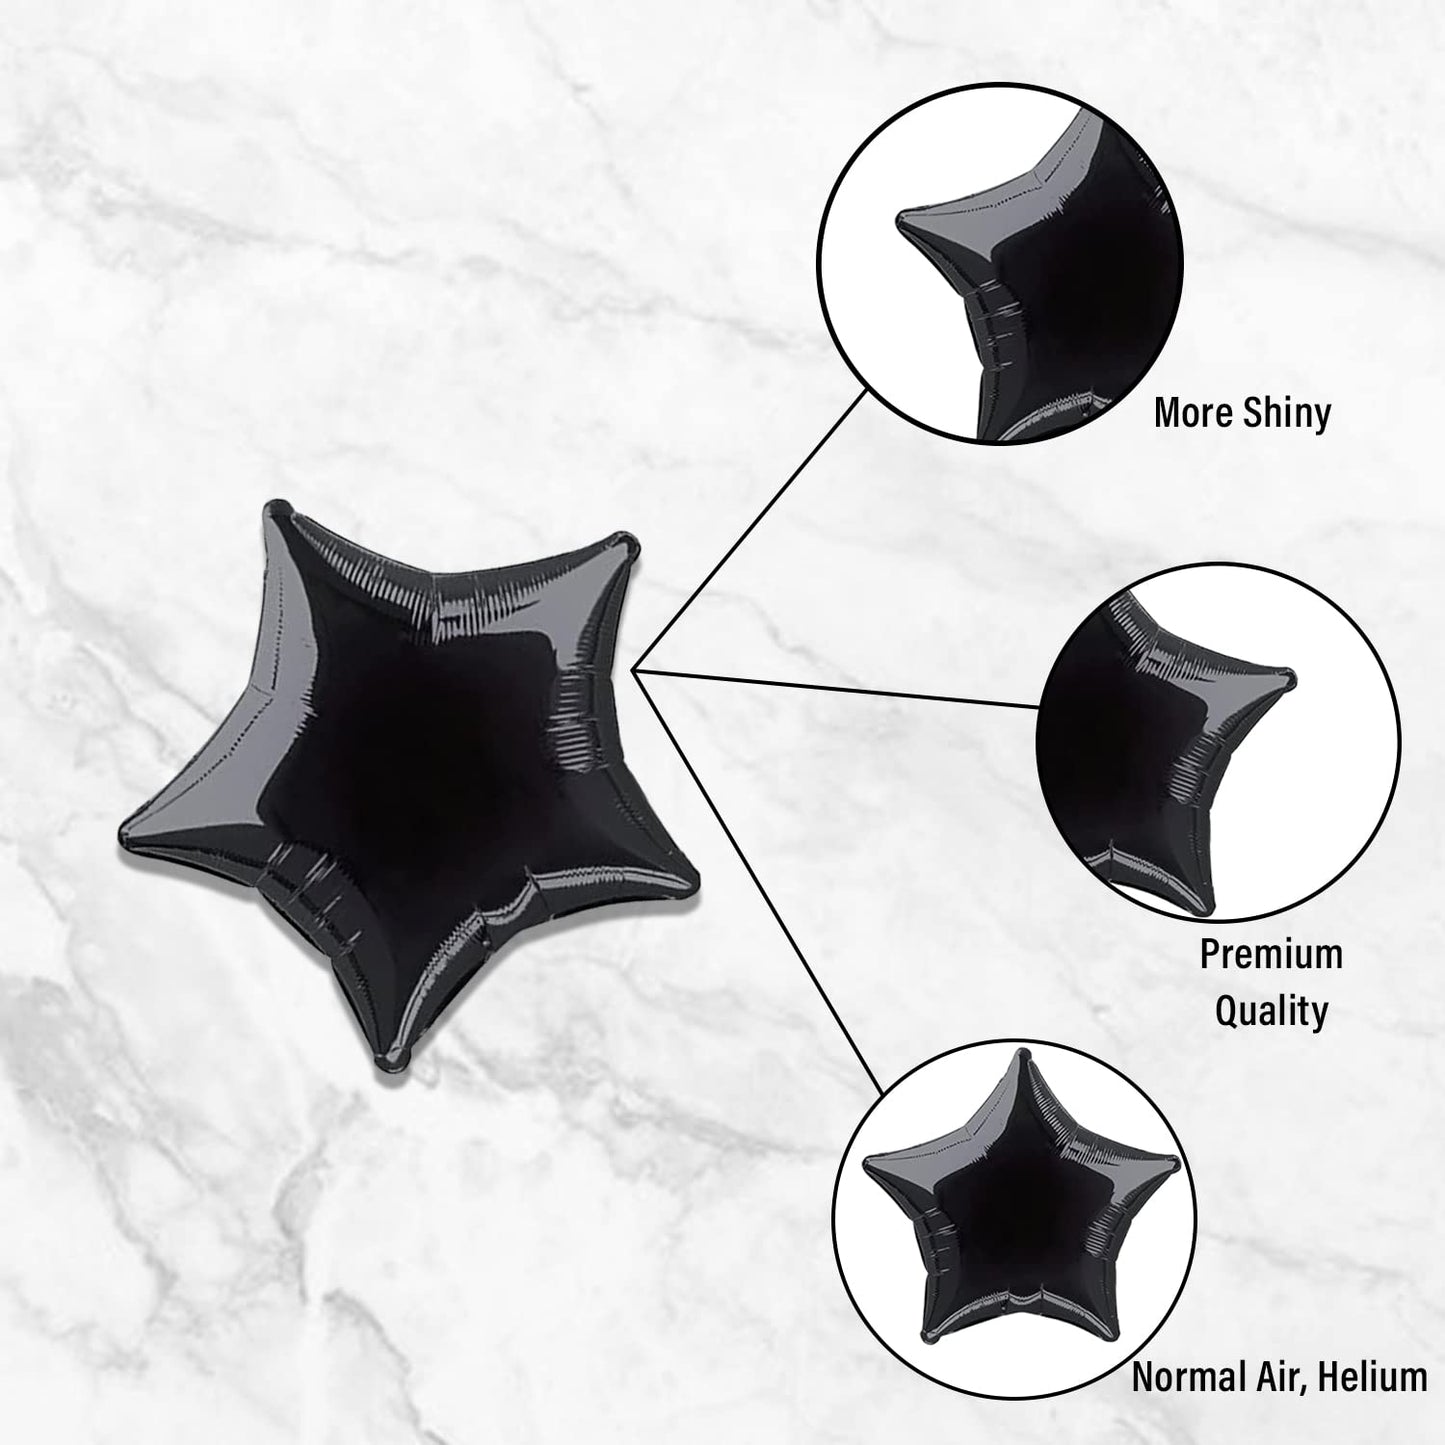 Black & Silver Balloons For New Year Decoration - Pack of 30 - Digit Foil, Star Shape Foil, Metallic & Latex Balloons Foil Balloon Kit DIY Decoration Party Kit Party Supplies - CherishX Partystore